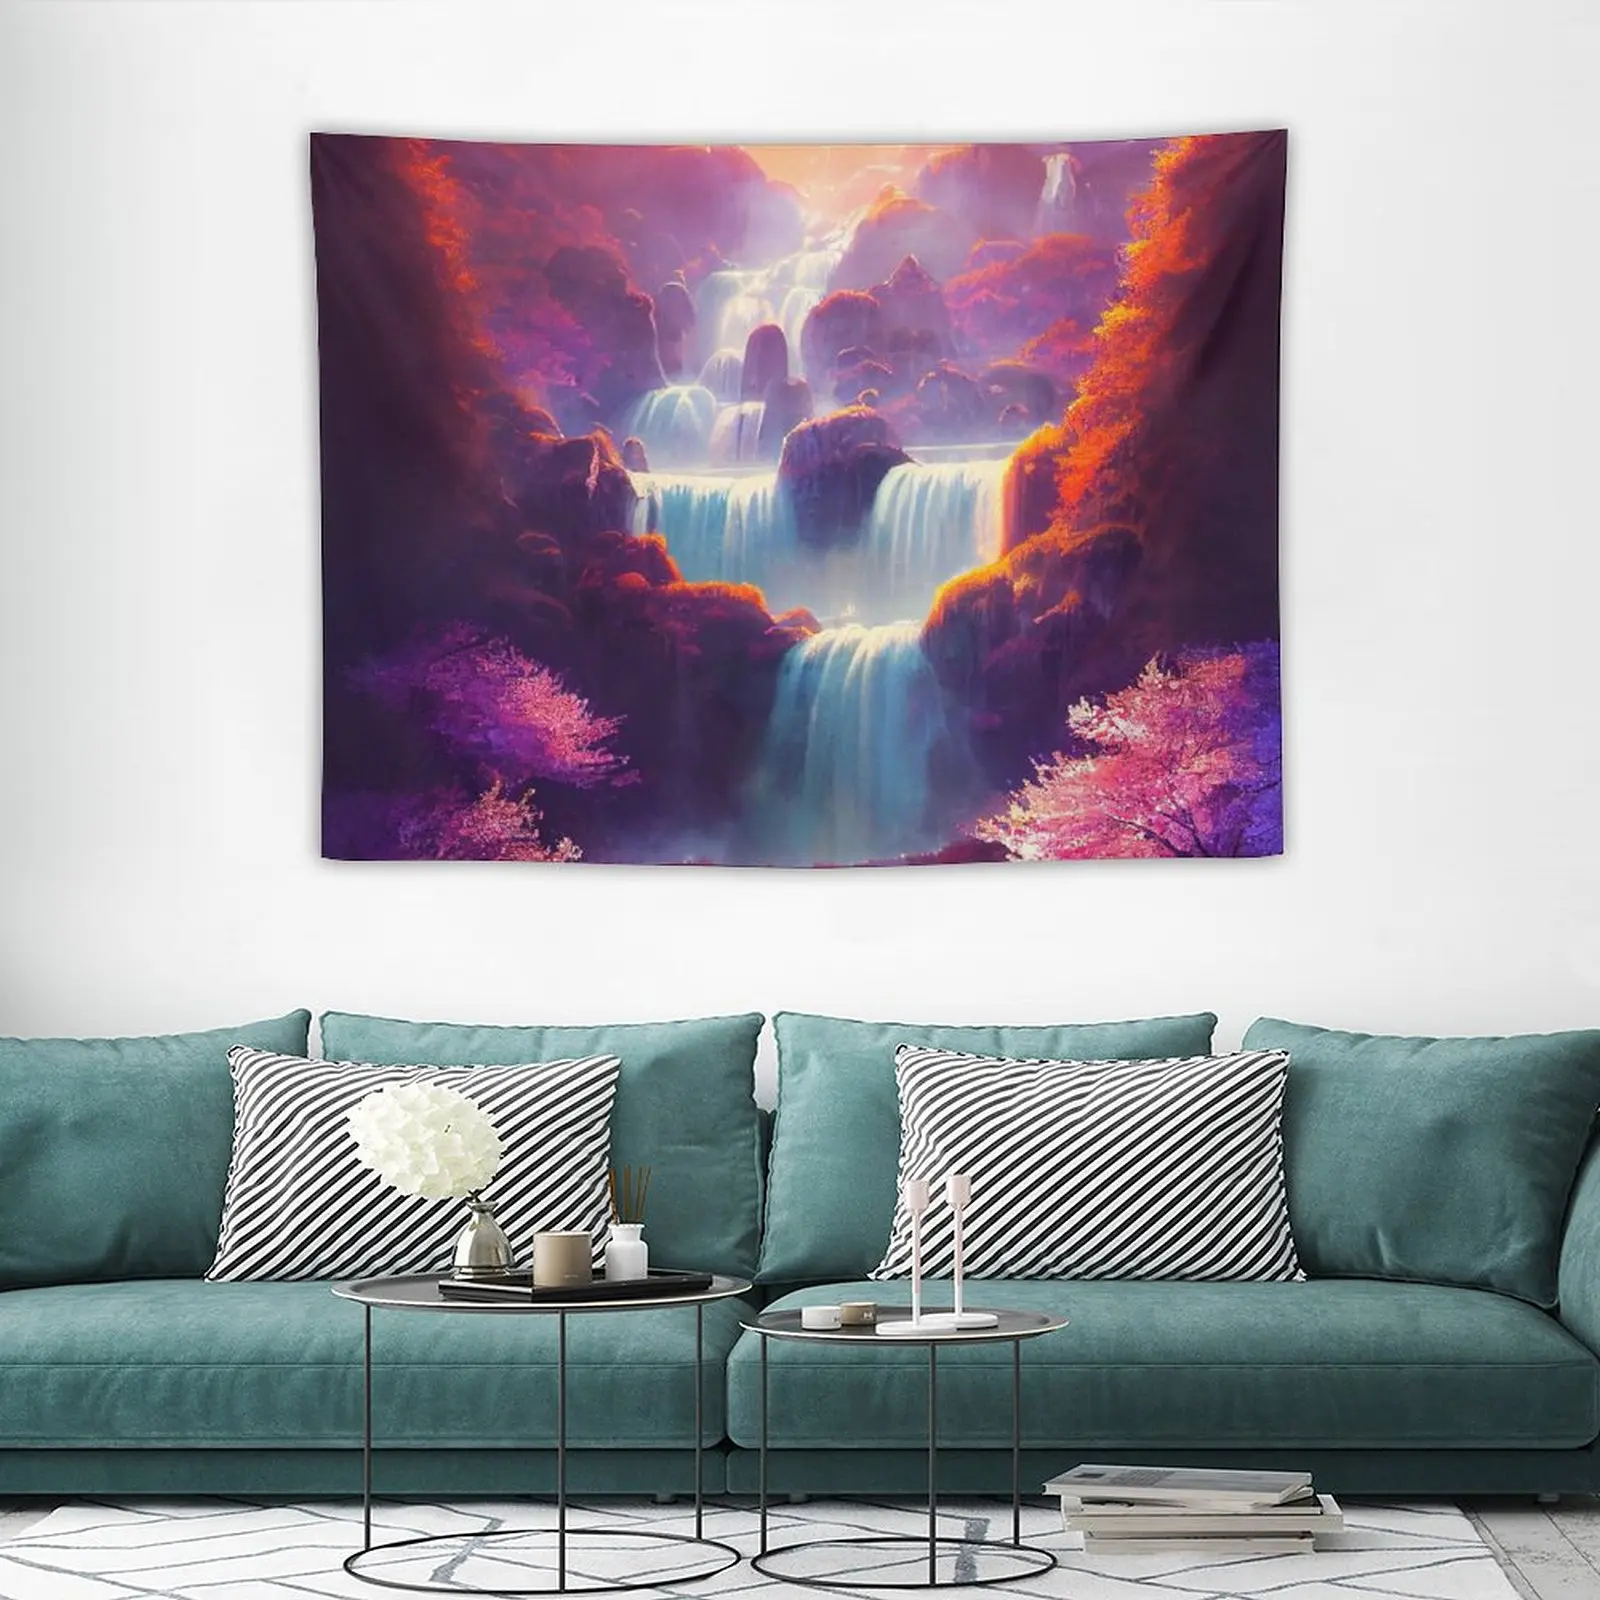 

Witch Sunset Waterfall Tapestry Aesthetic Room Decor Wall Hanging Room Decorarion Aesthetic Large Wall Mural